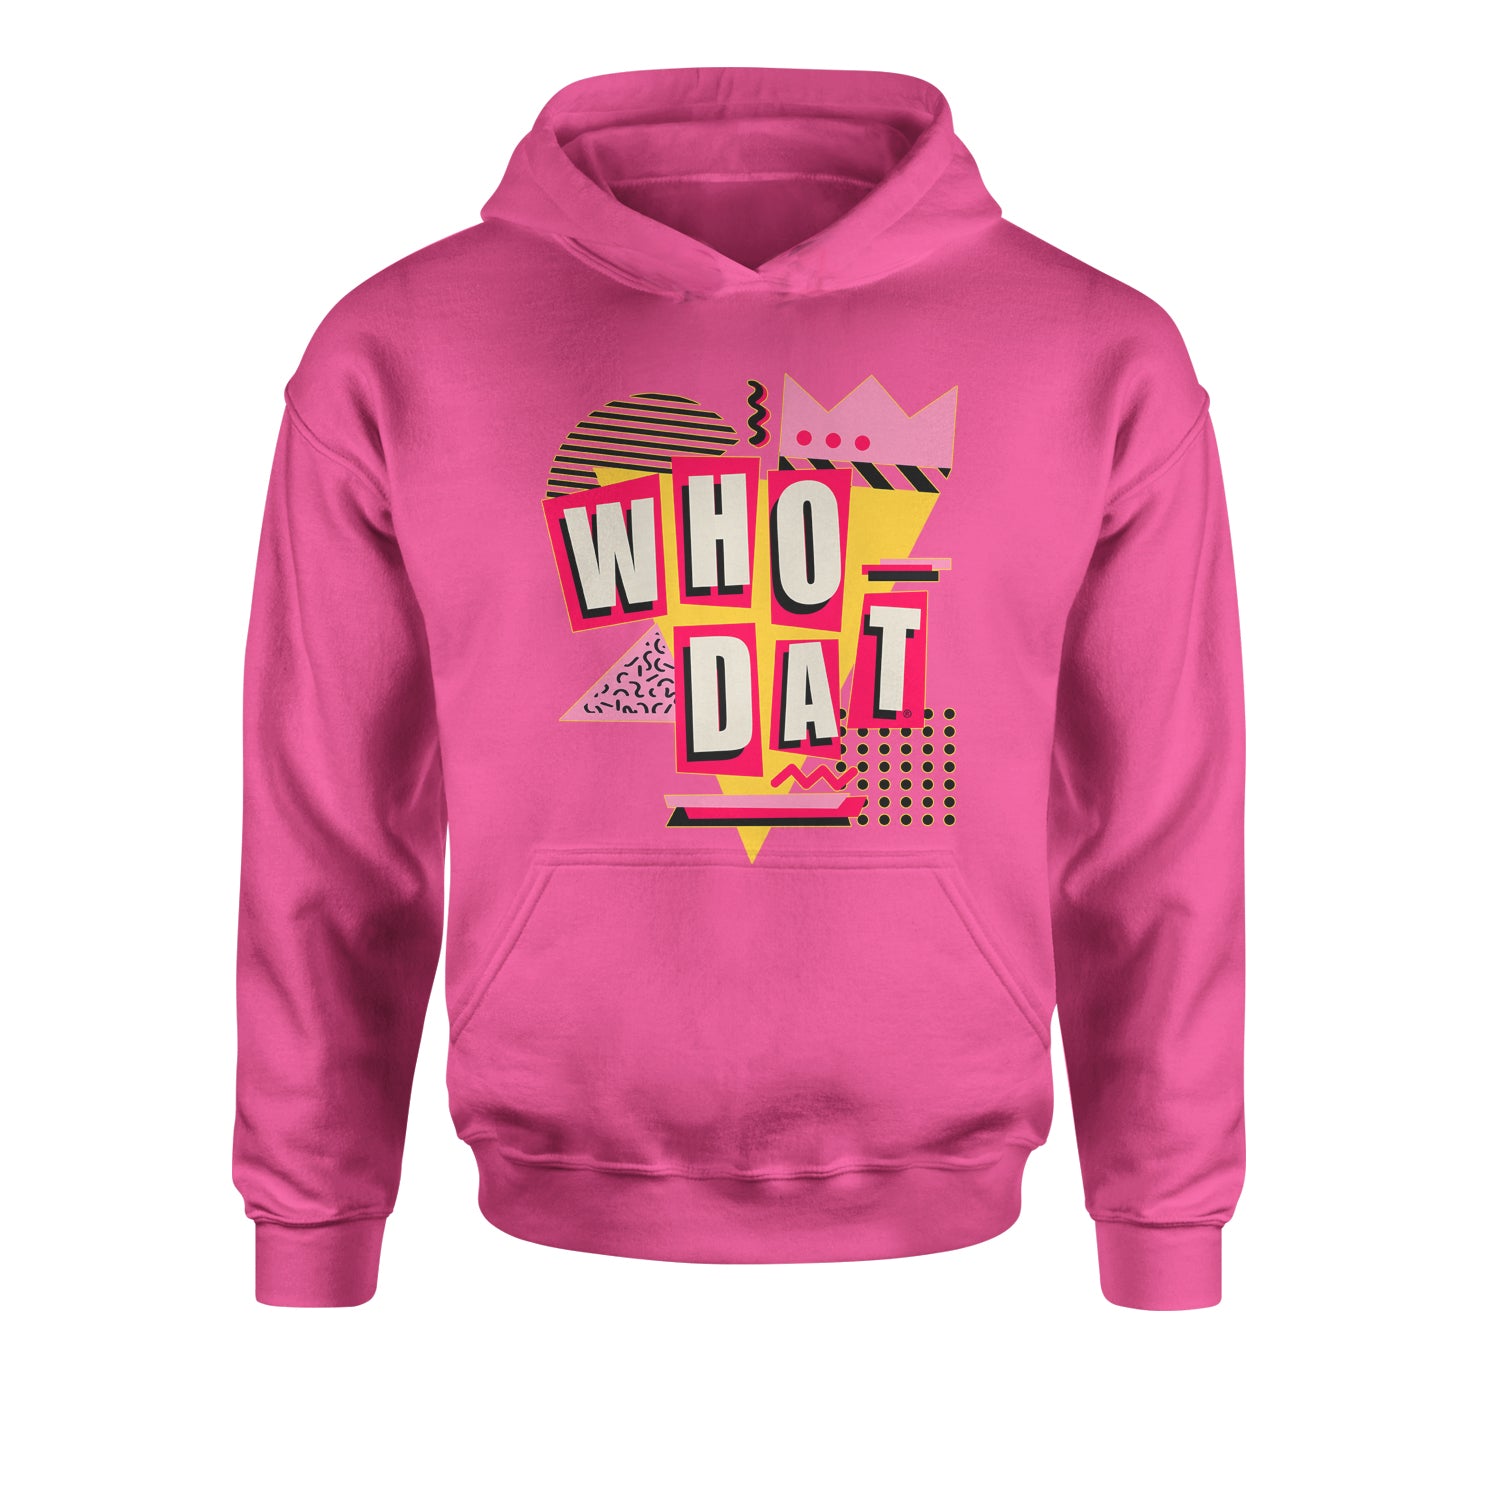 Who Dat New Orleans Youth-Sized Hoodie brees, colston, drew, louisiana, marques, payton, sean by Expression Tees